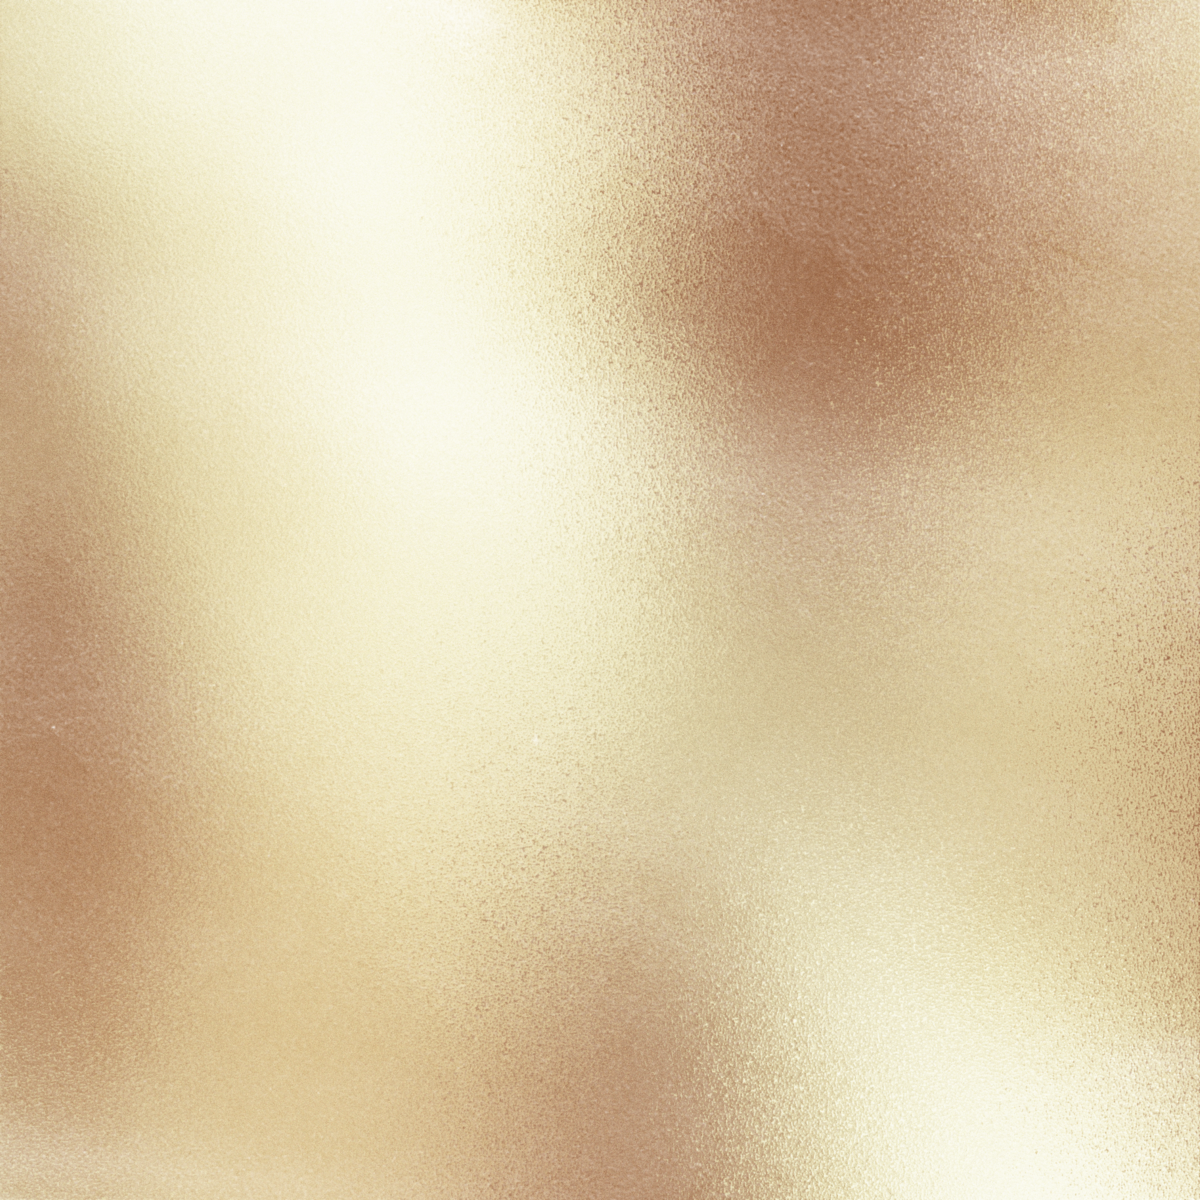 Bright gold foil background